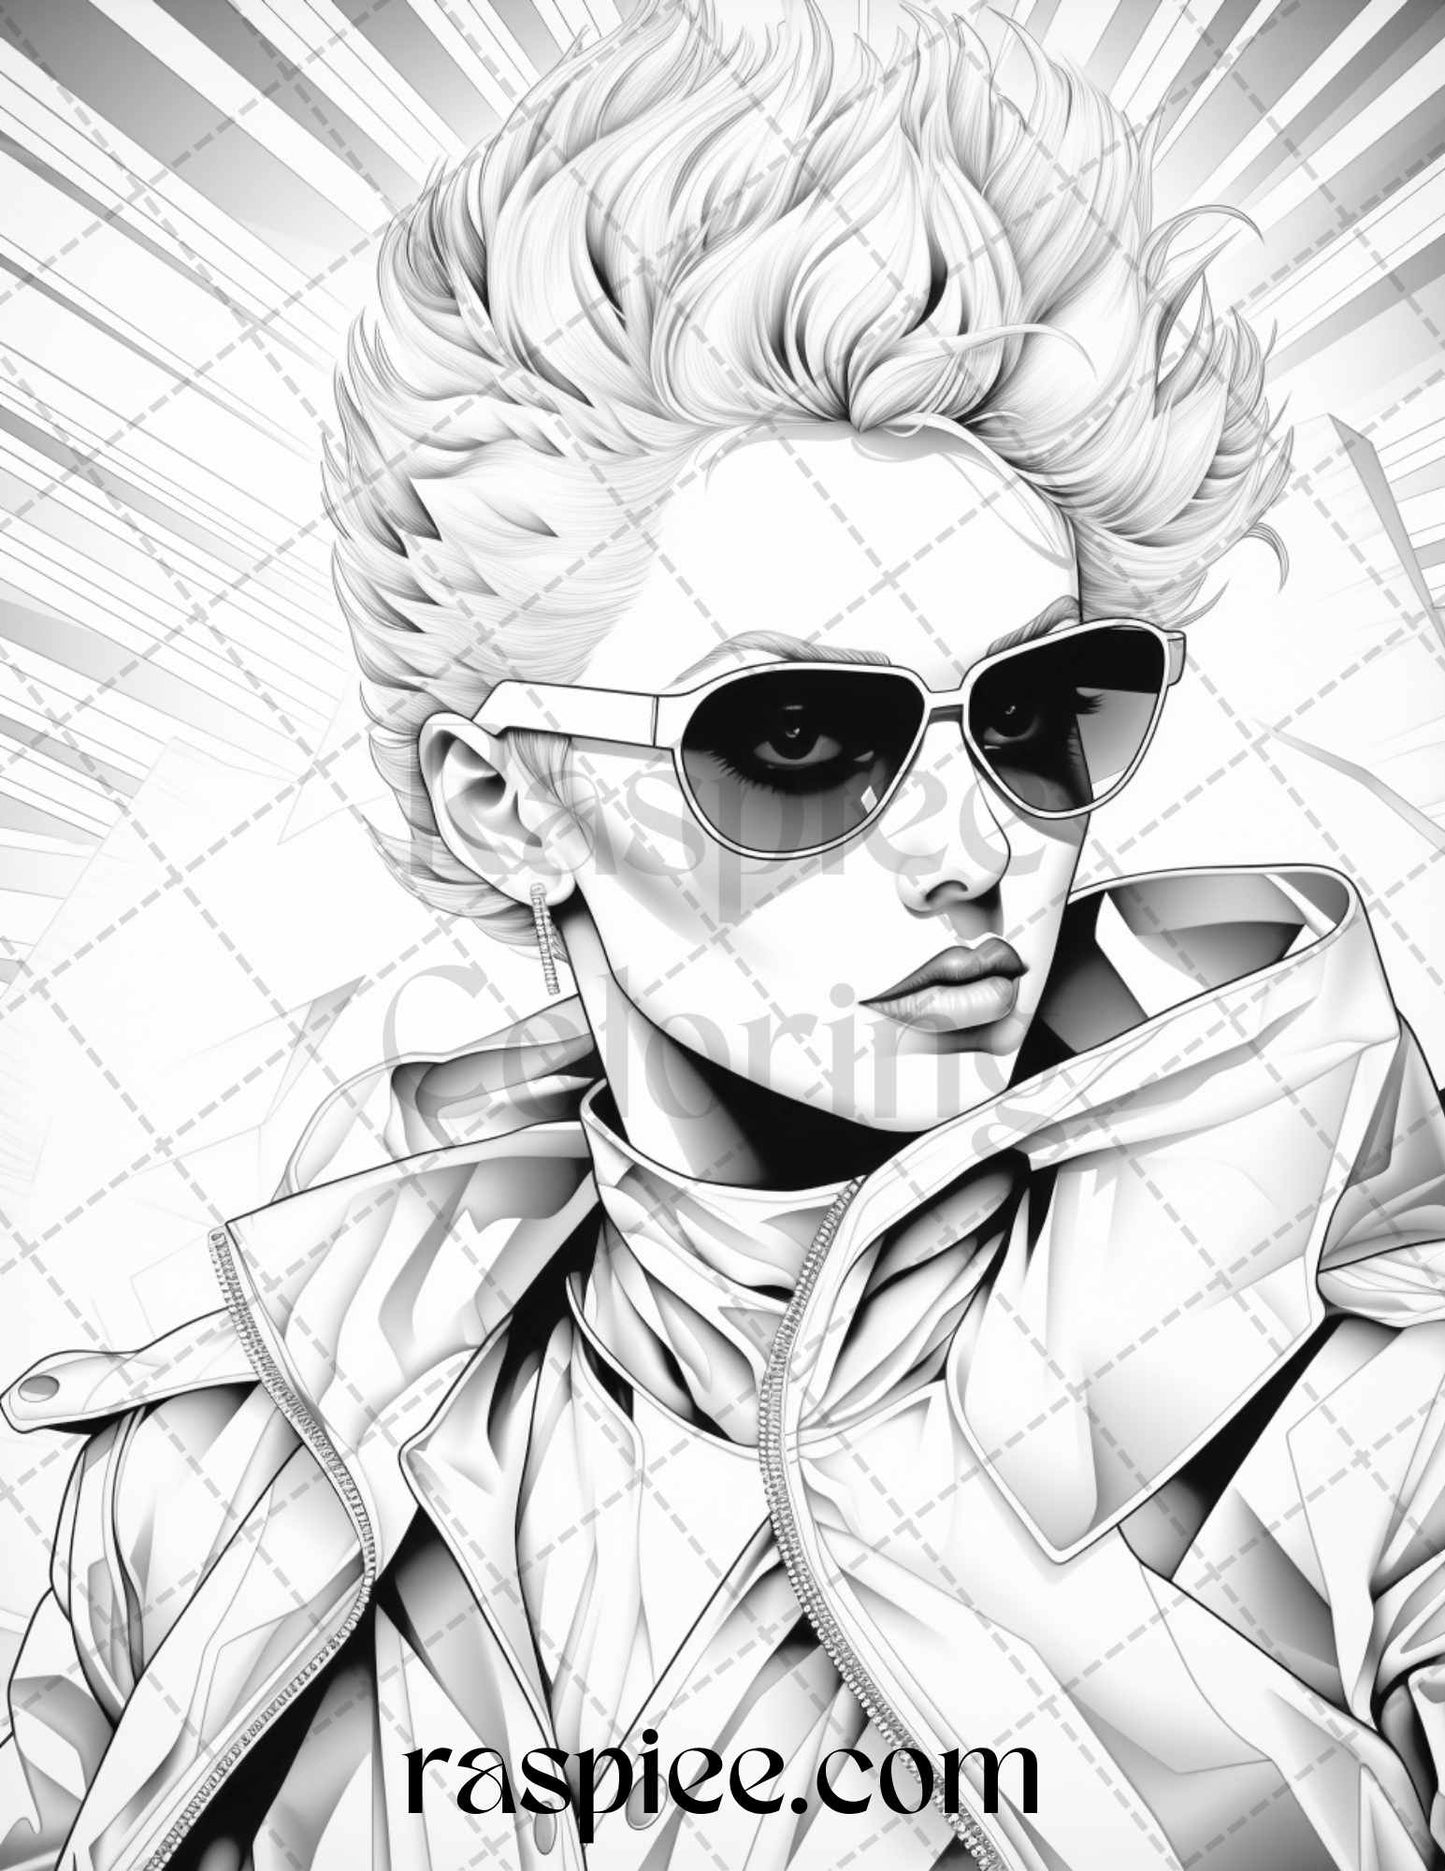 1980s New Wave Pop Star Coloring Page, Retro Coloring Pages for Adults, Adult Coloring Activity, Retro DIY Home Decor, Creative Coloring Sheet, Relaxation Therapy Art, Detailed Line Artwork, Nostalgic Coloring Pages, Portrait Coloring Pages for Adults, Portrait Grayscale Coloring Pages, Music Coloring Pages